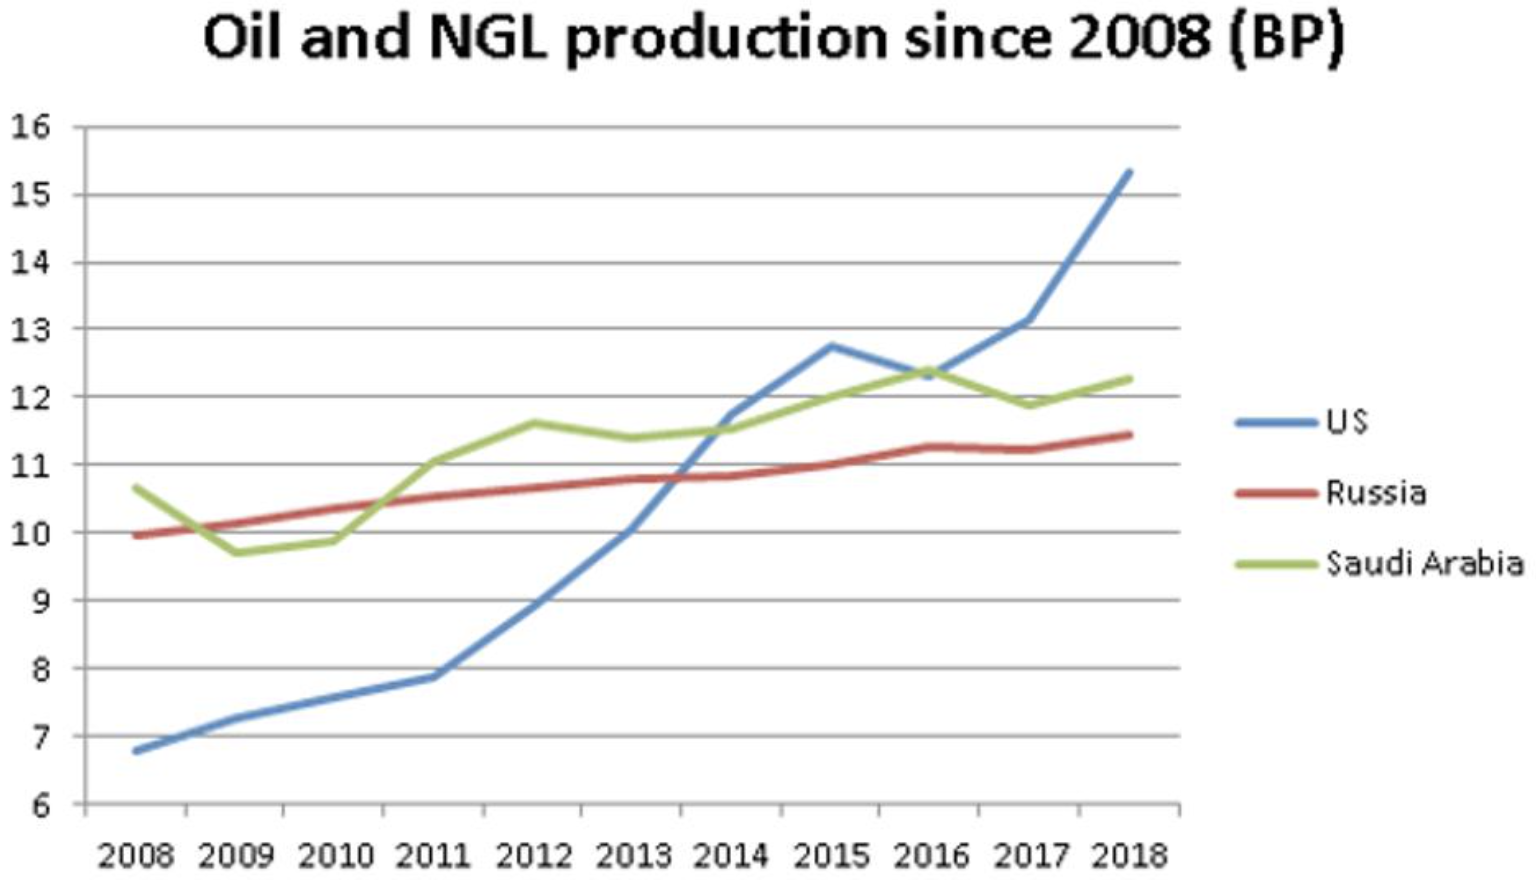 This graph compares oil and NGL production for U.S., Russia, and Saudi Arabia, 2008–2018.